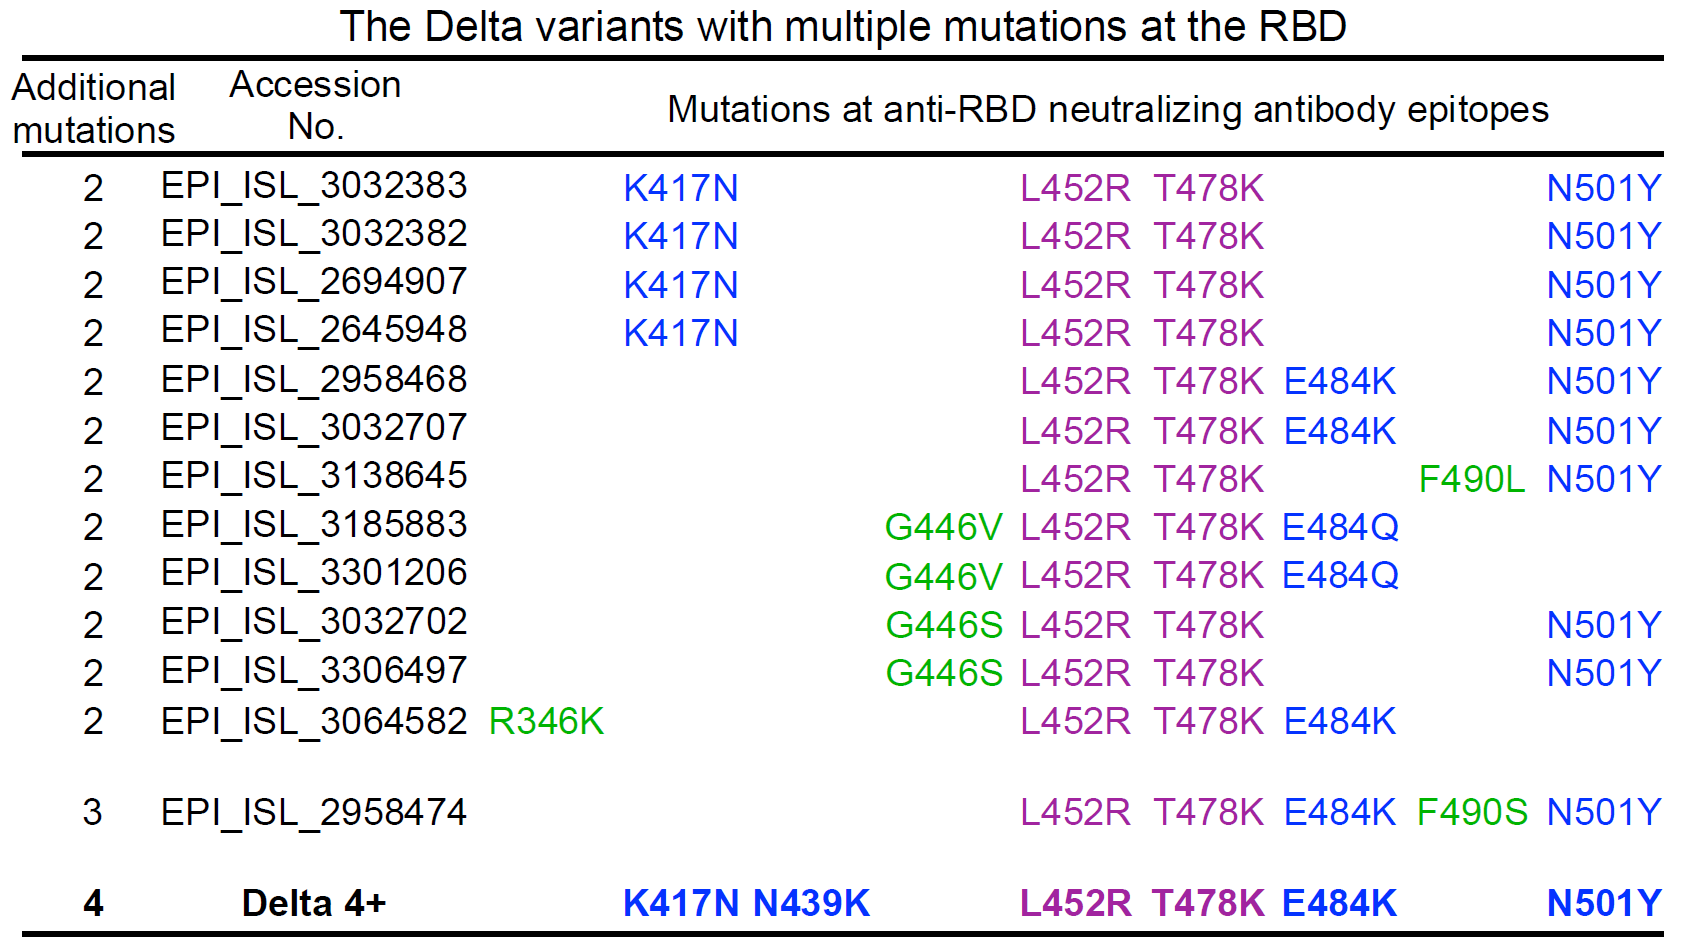 File: Lui 2021 mutations at RBD.png (139 KB, 1697x949)